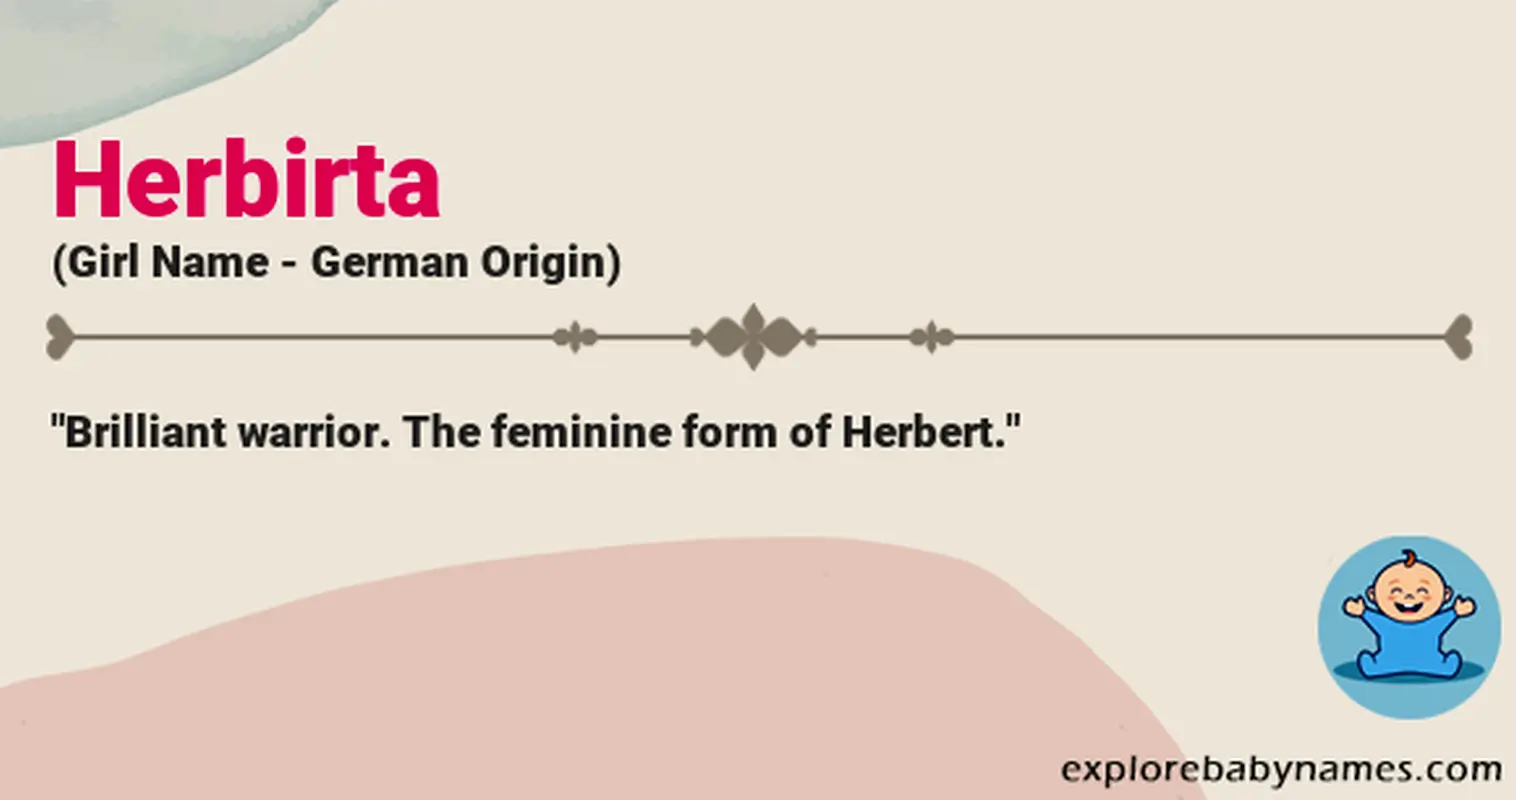 Meaning of Herbirta